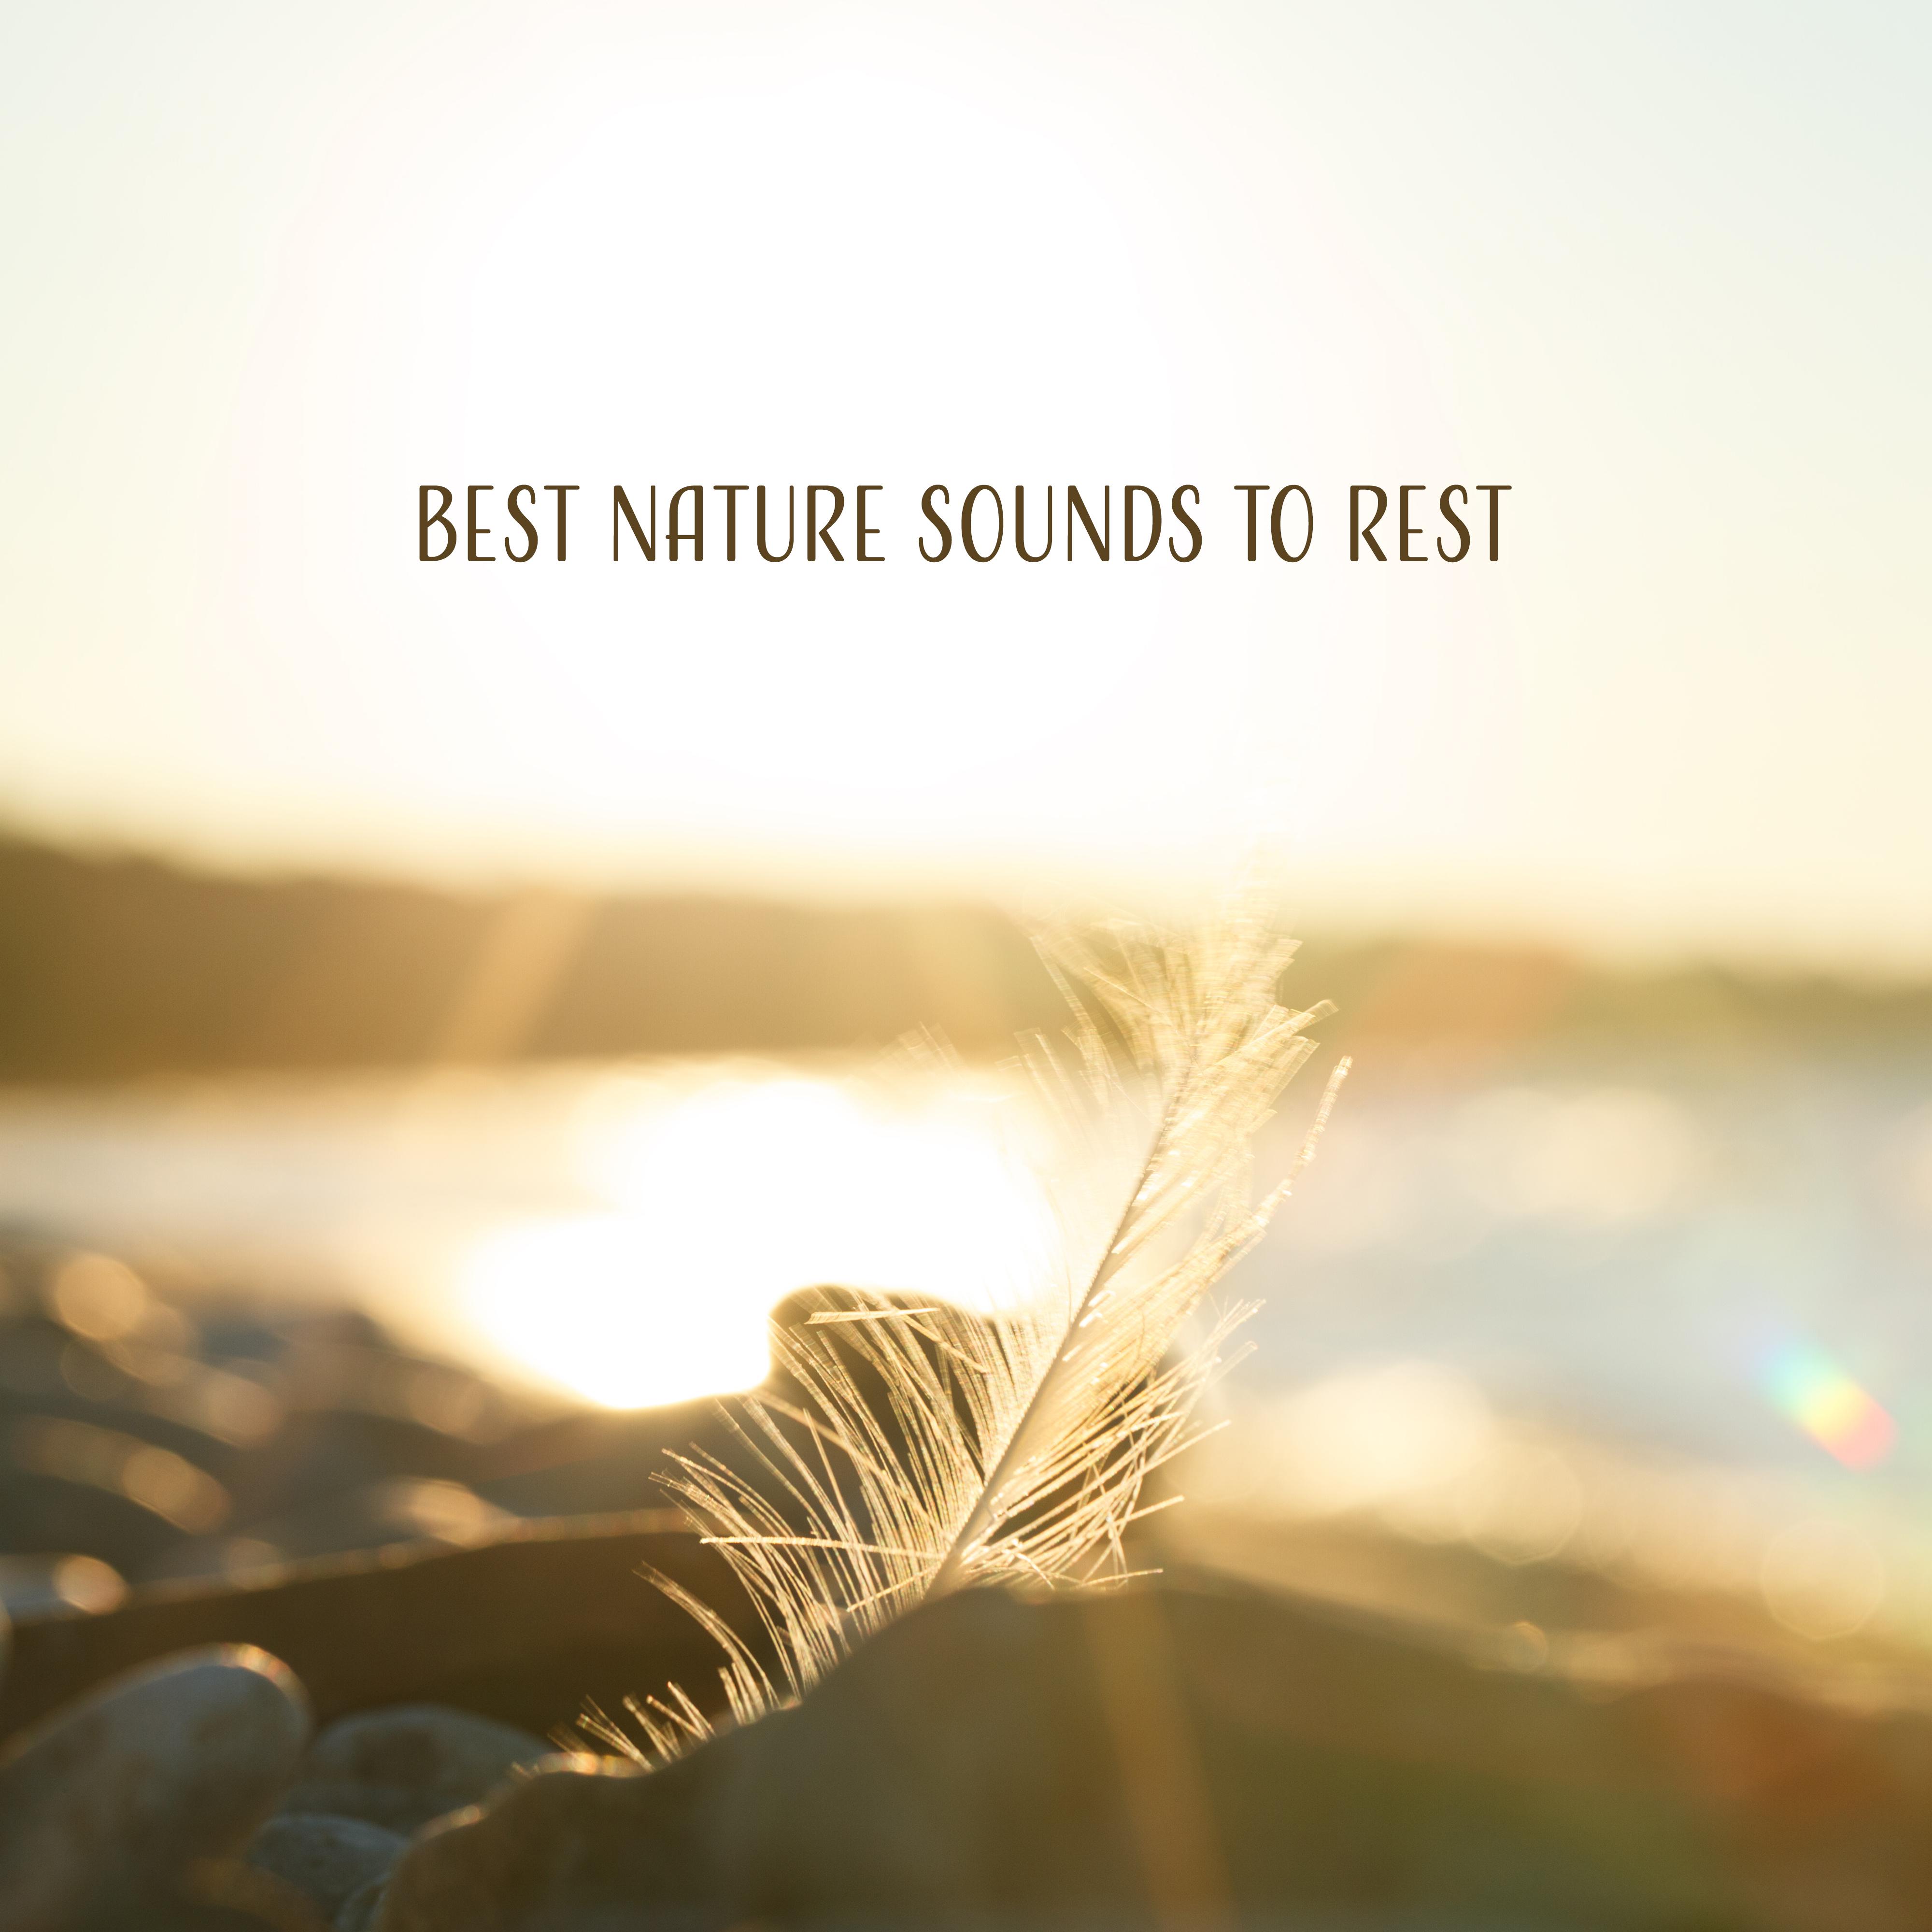 Best Nature Sounds to Rest – Pure Relaxation, Sounds of Forest, Deep Meditation, Peaceful Waves